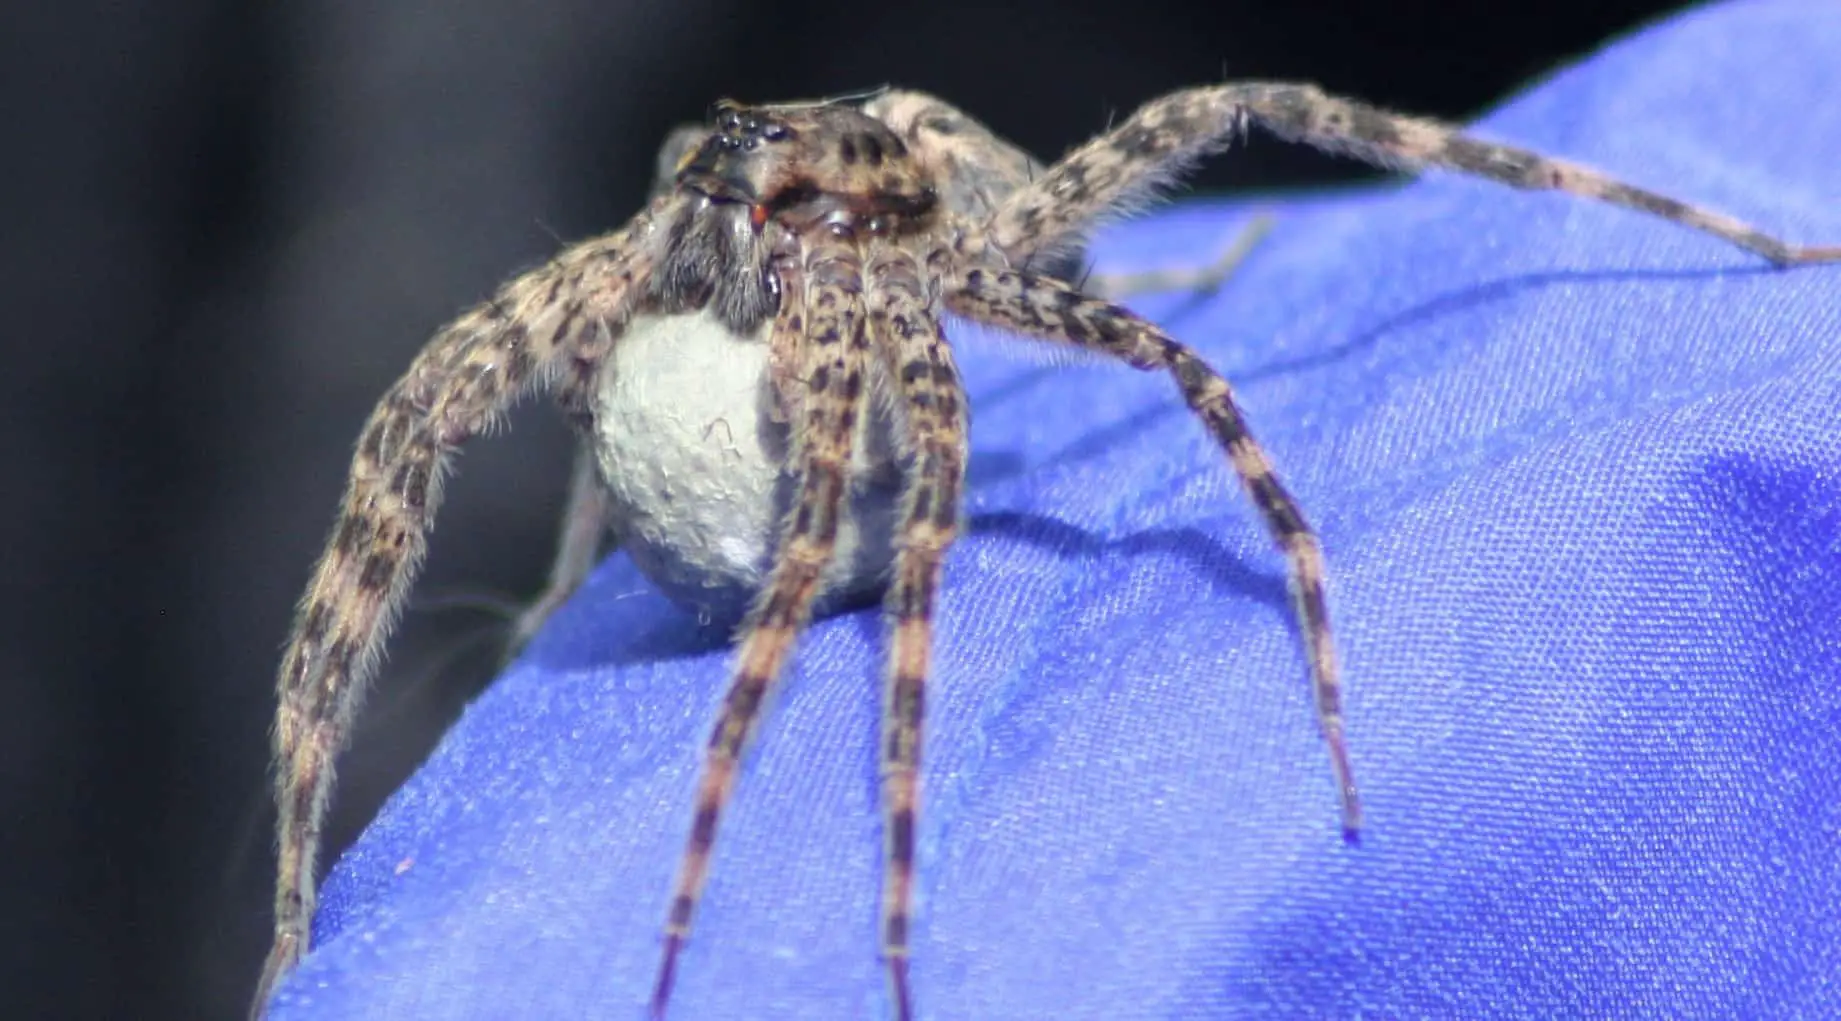 Fishing Spider with egg sac